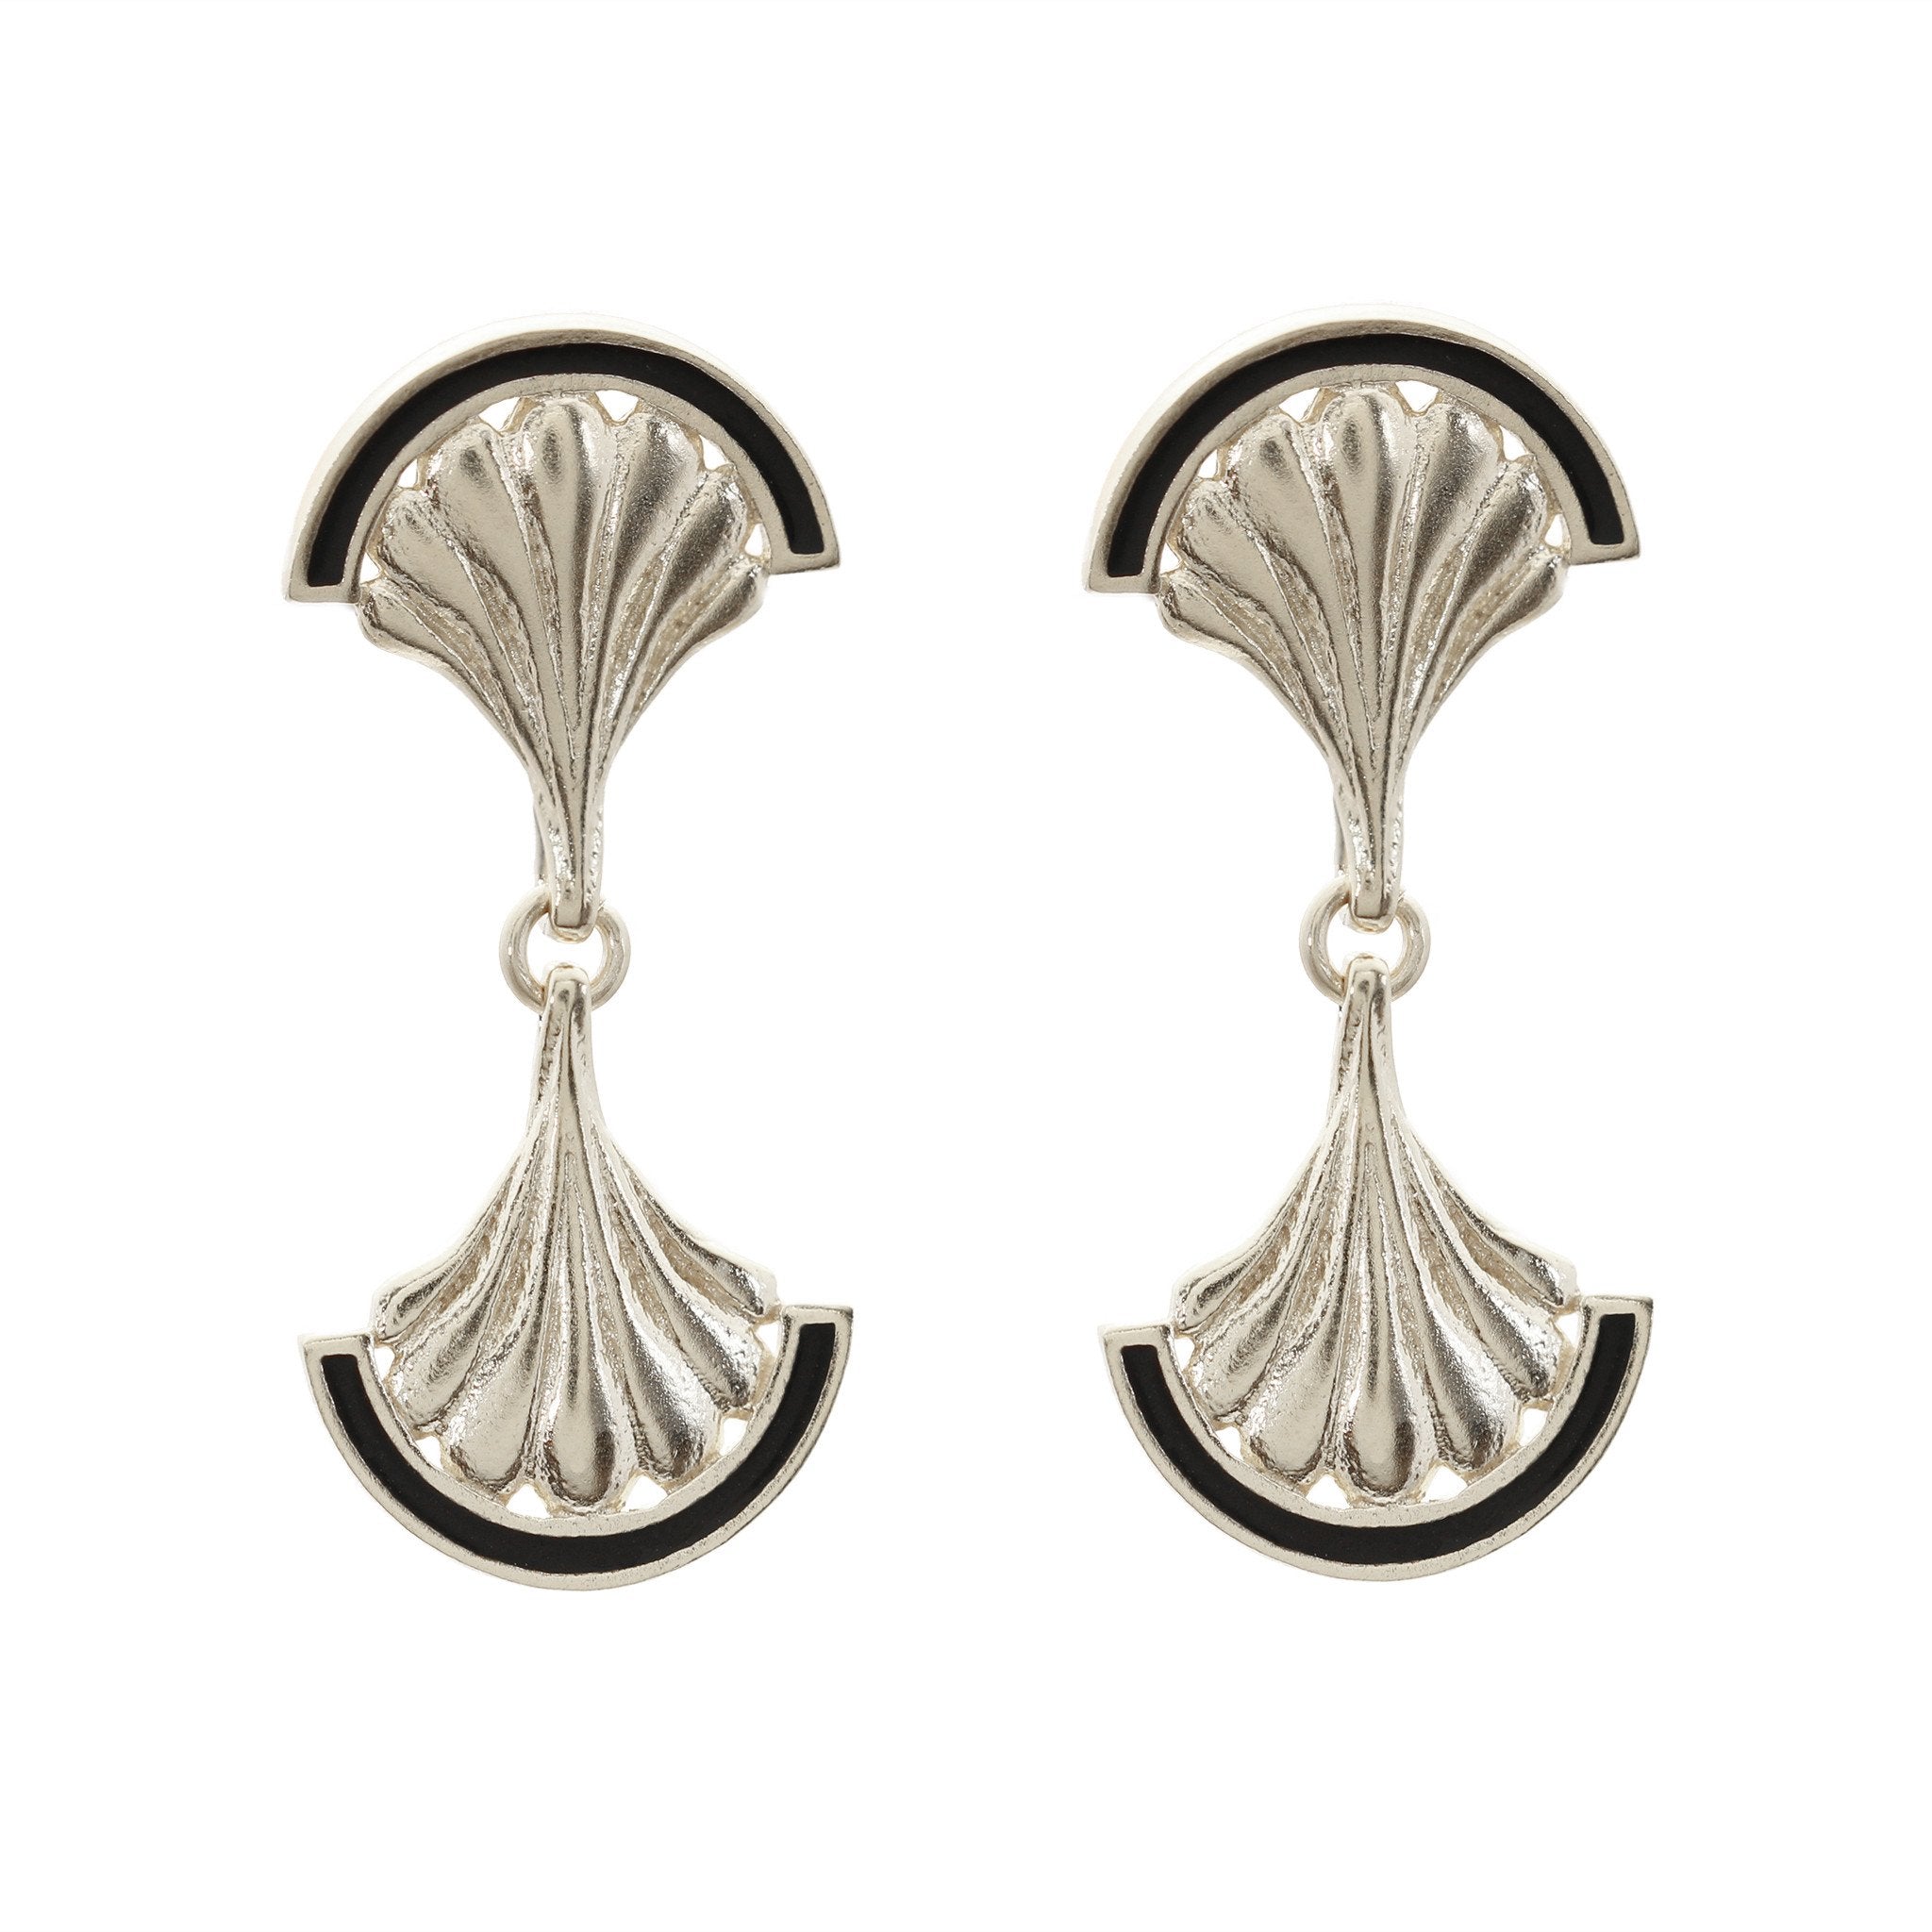 A pair of silver shell drop earrings with black enamel detail